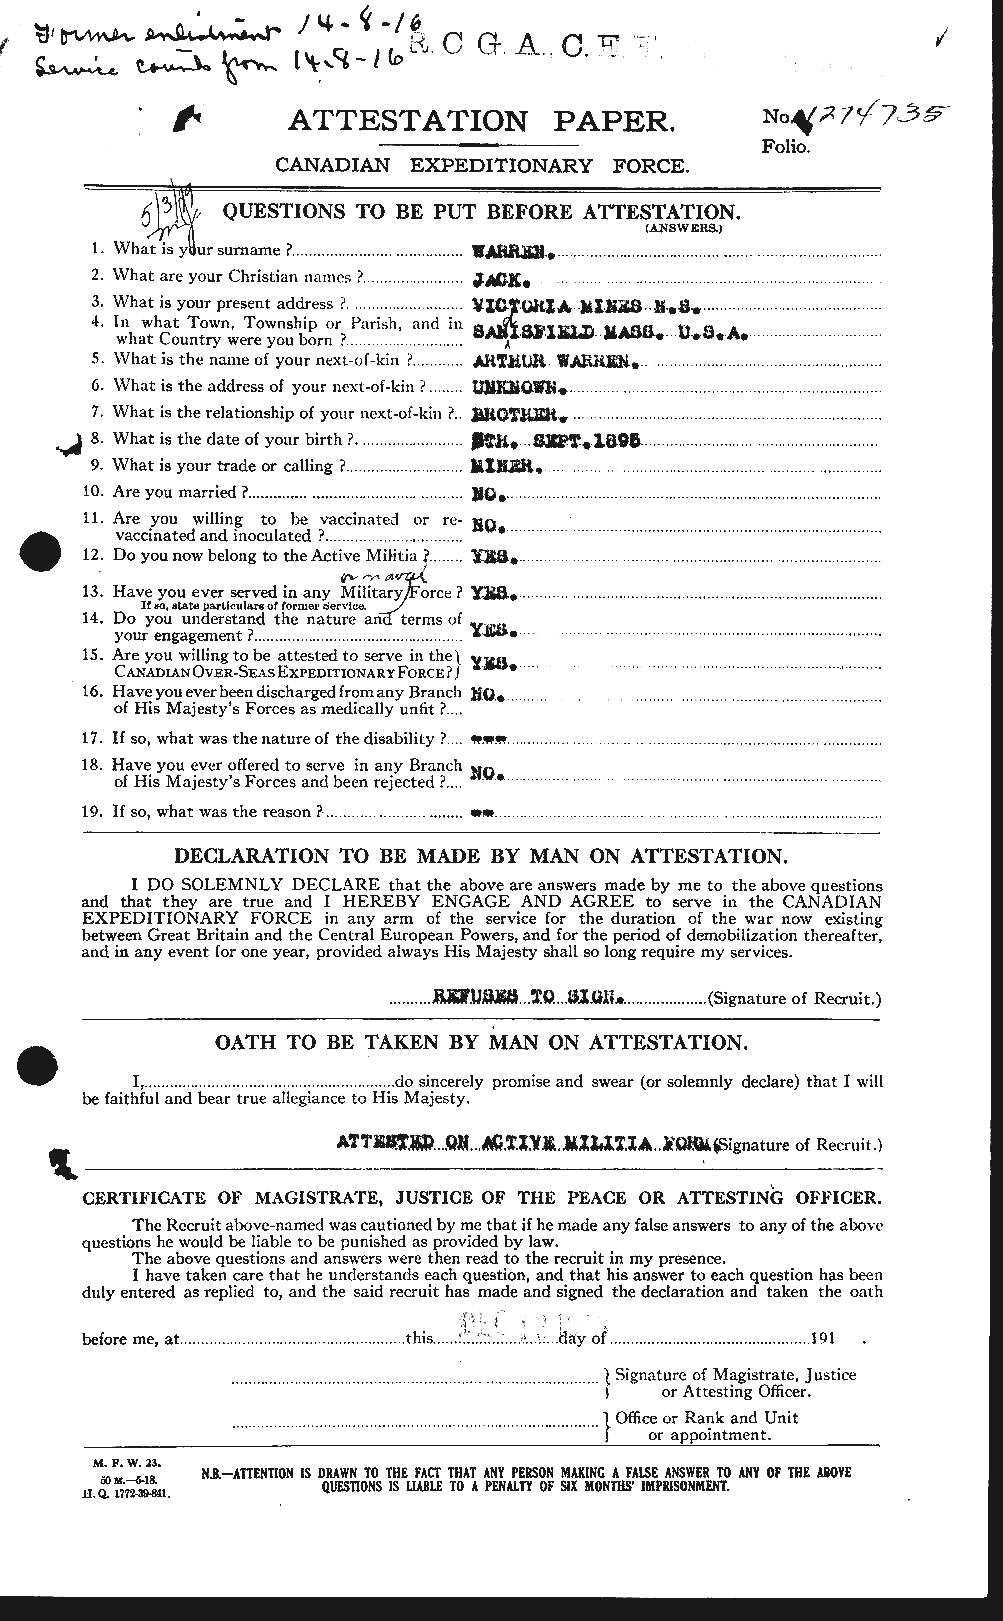 Personnel Records of the First World War - CEF 658514a